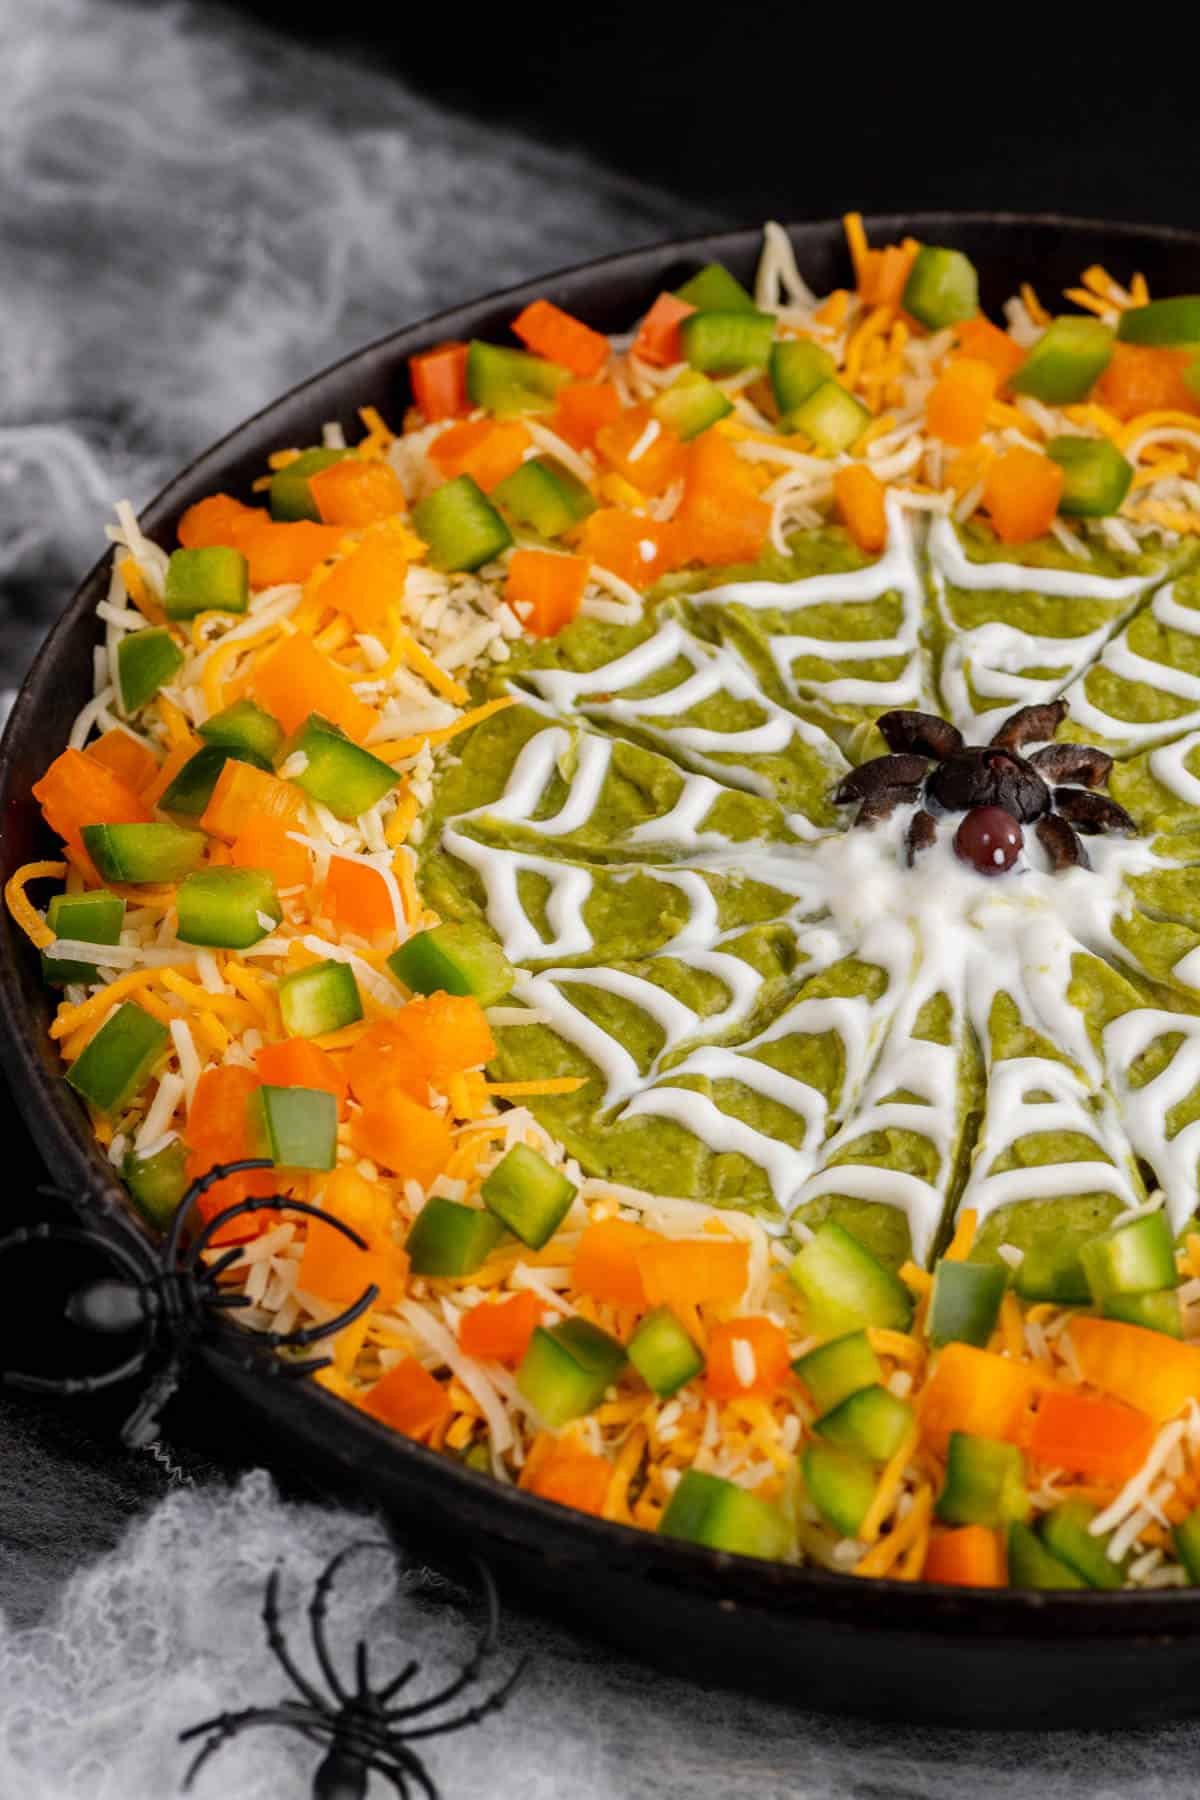 Spider Web Dip; Part of 15 Spooky Savory Halloween Dishes, assembled by Jane Bonacci, The Heritage Cook, 2022. 